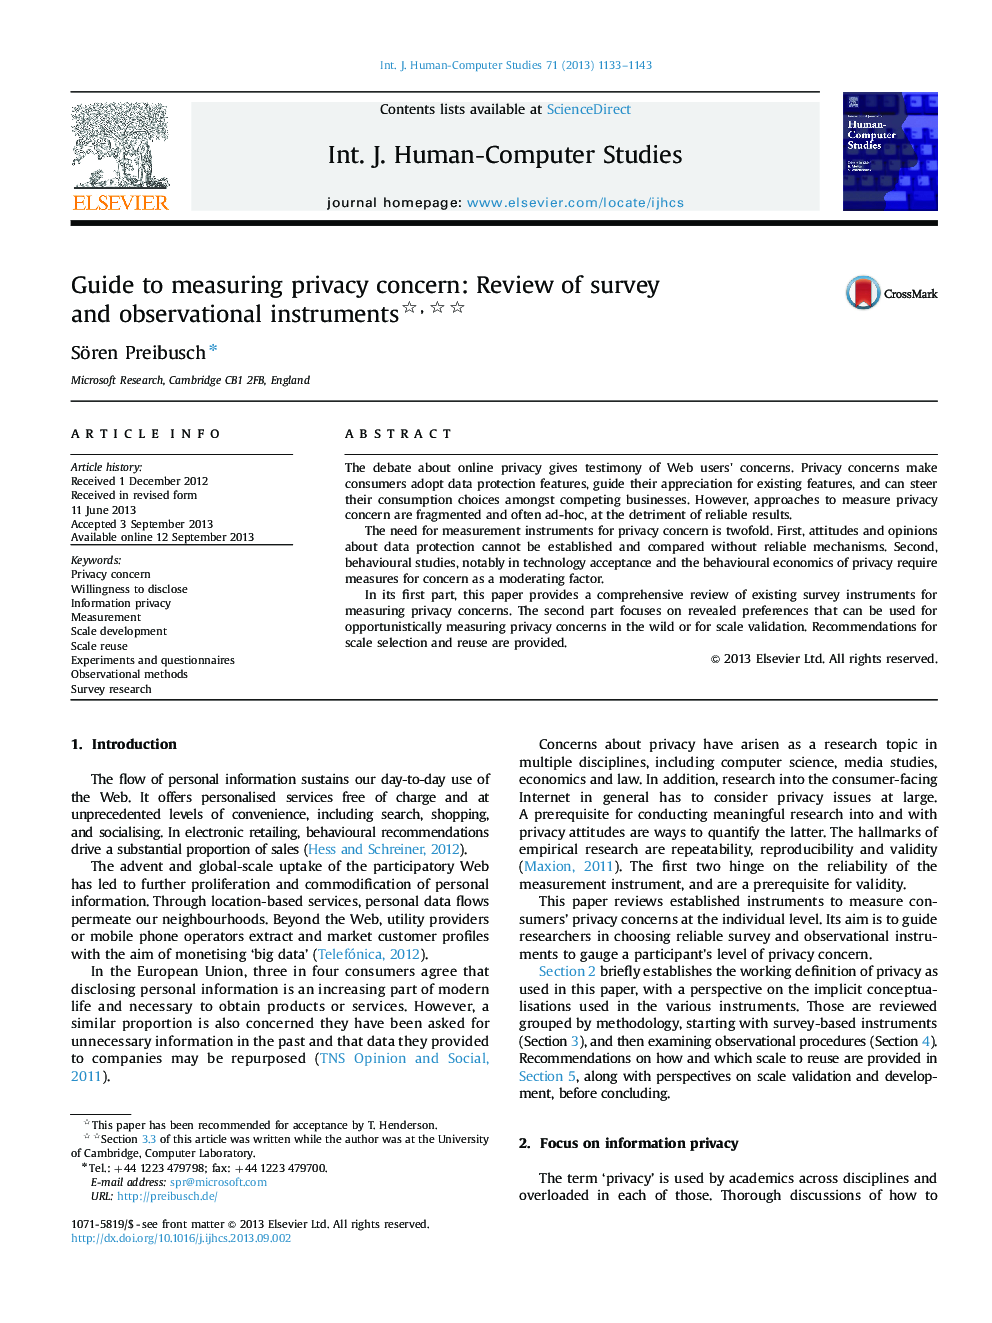 Guide to measuring privacy concern: Review of survey and observational instruments 